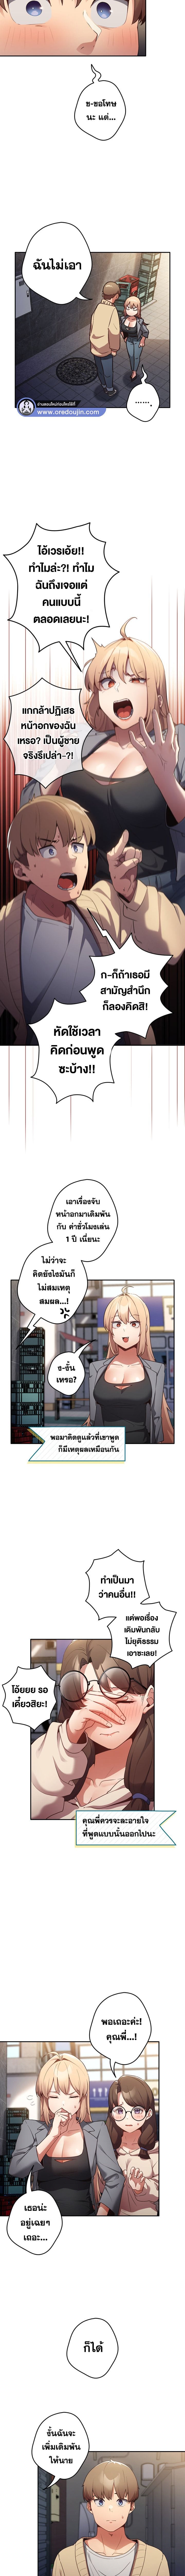 That’s Not How You Do It ตอนที่ 1 ภาพ 9